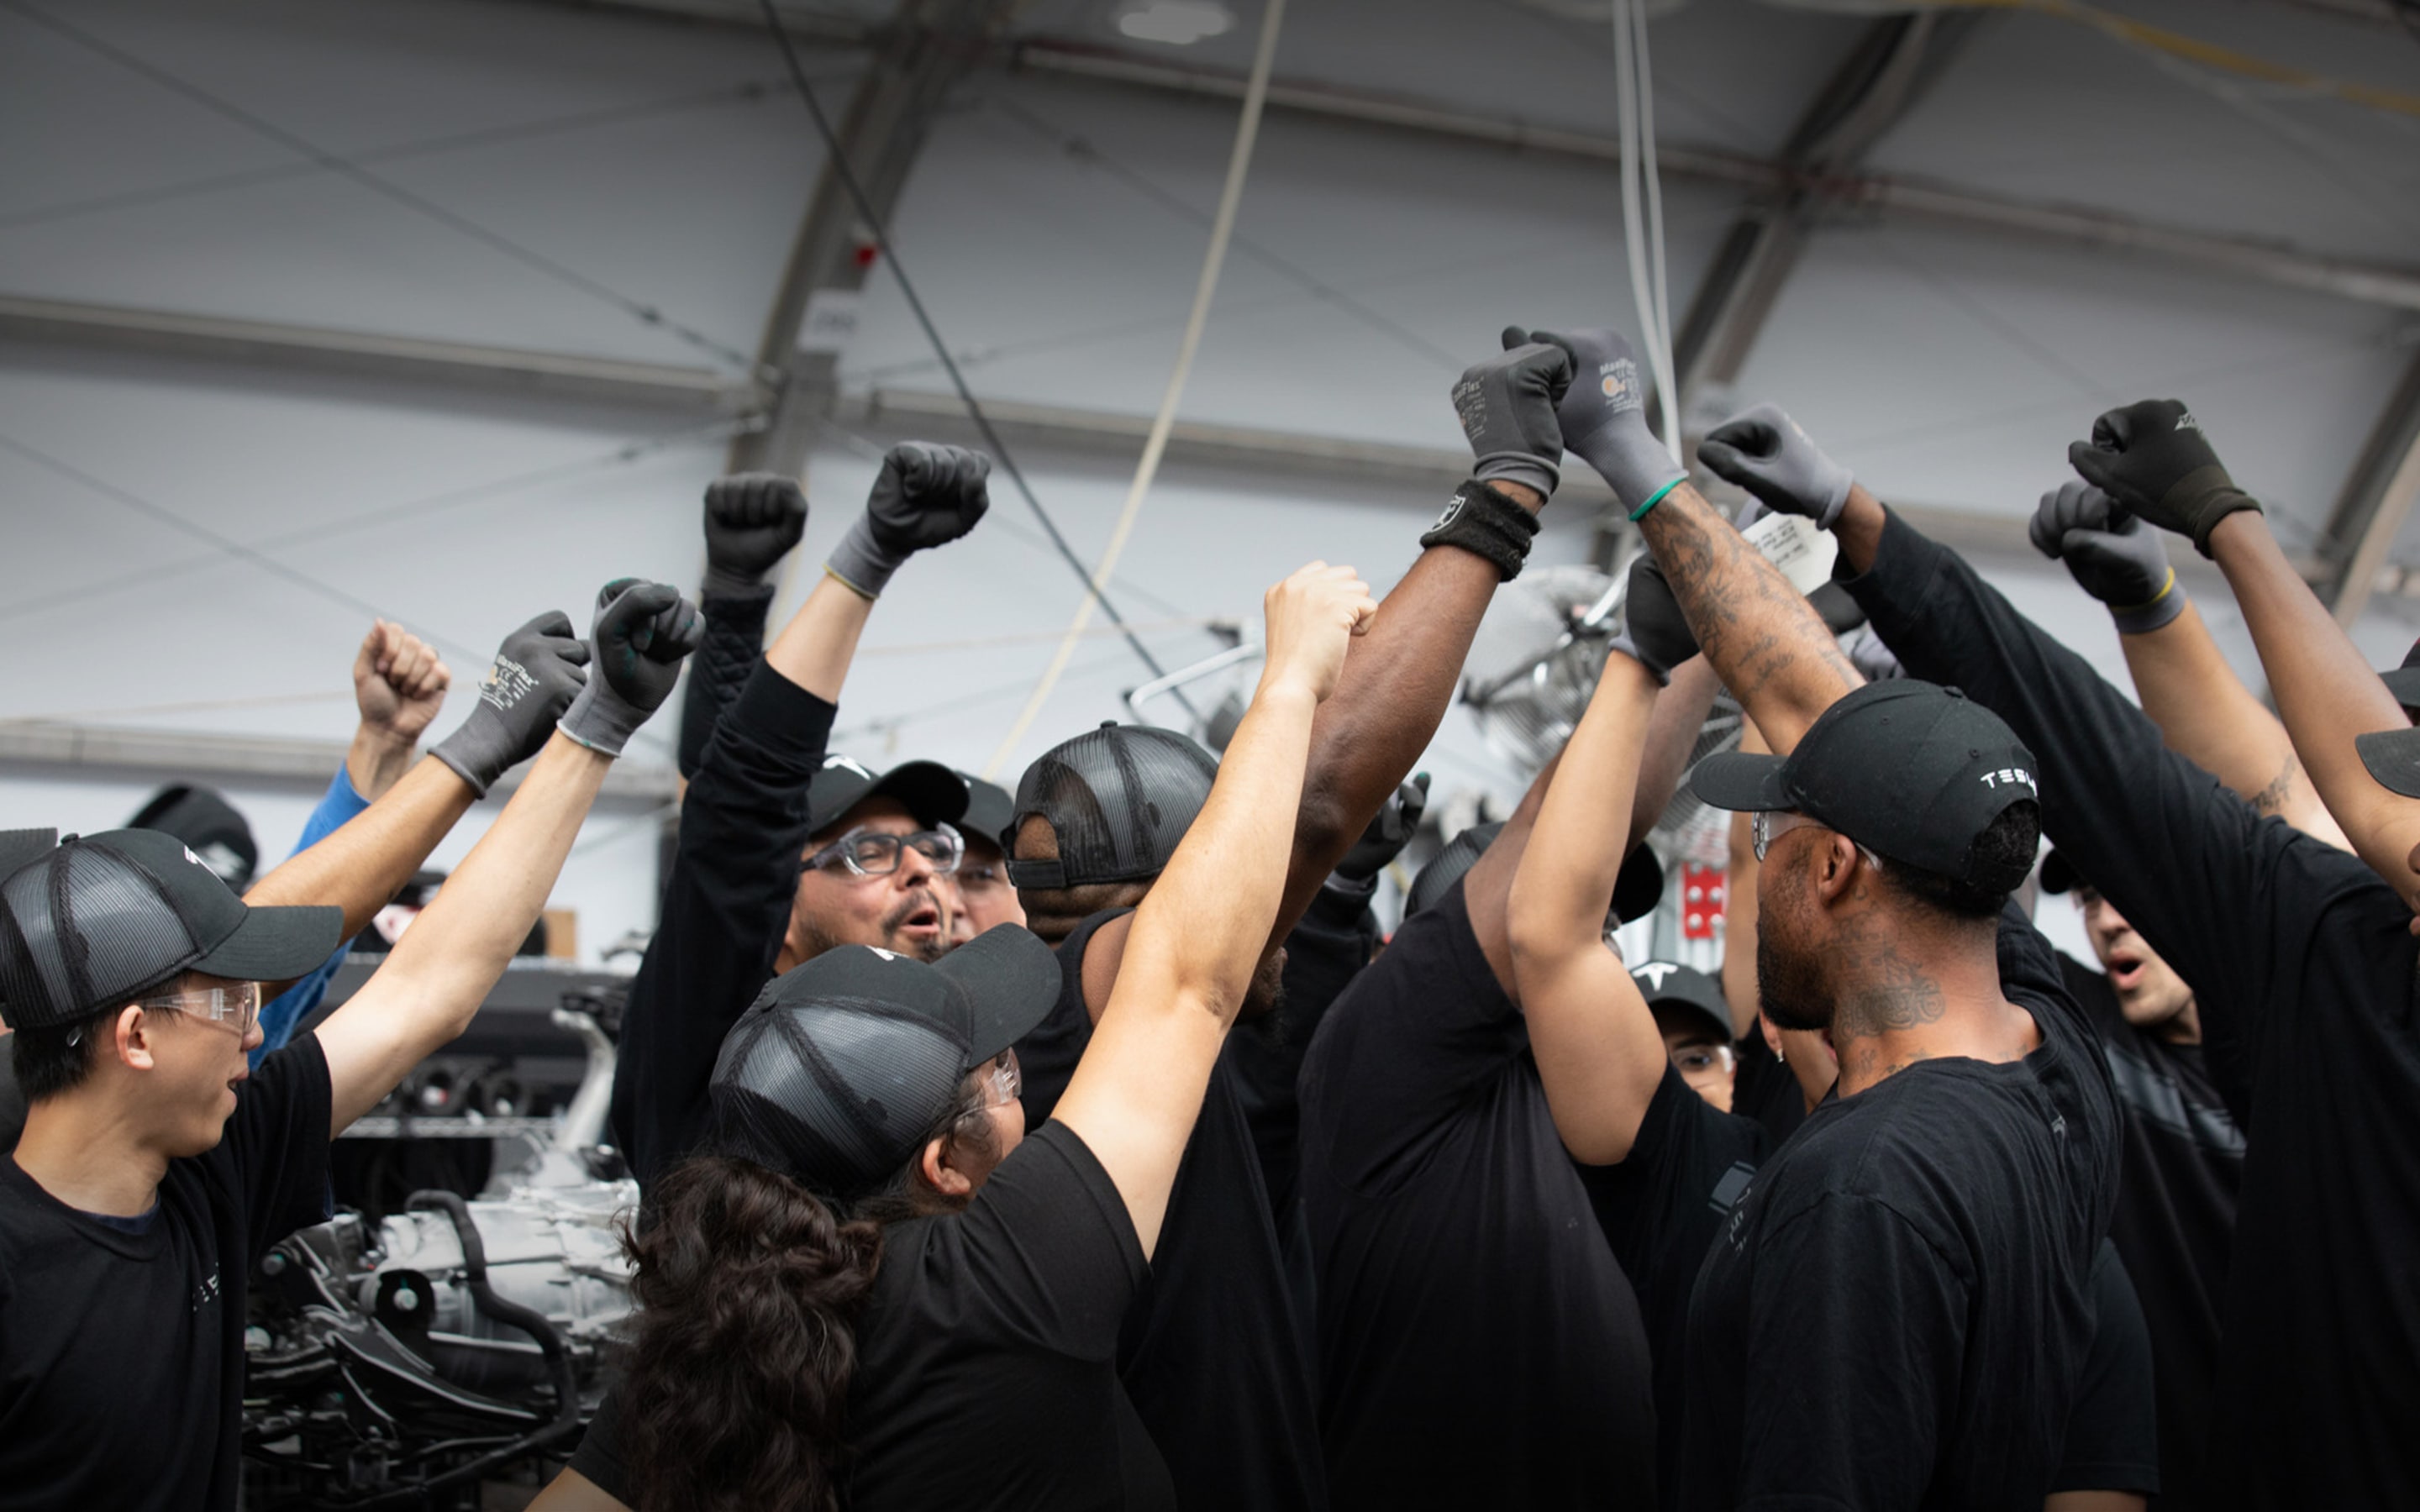 Tesla employees working together in manufacturing facility